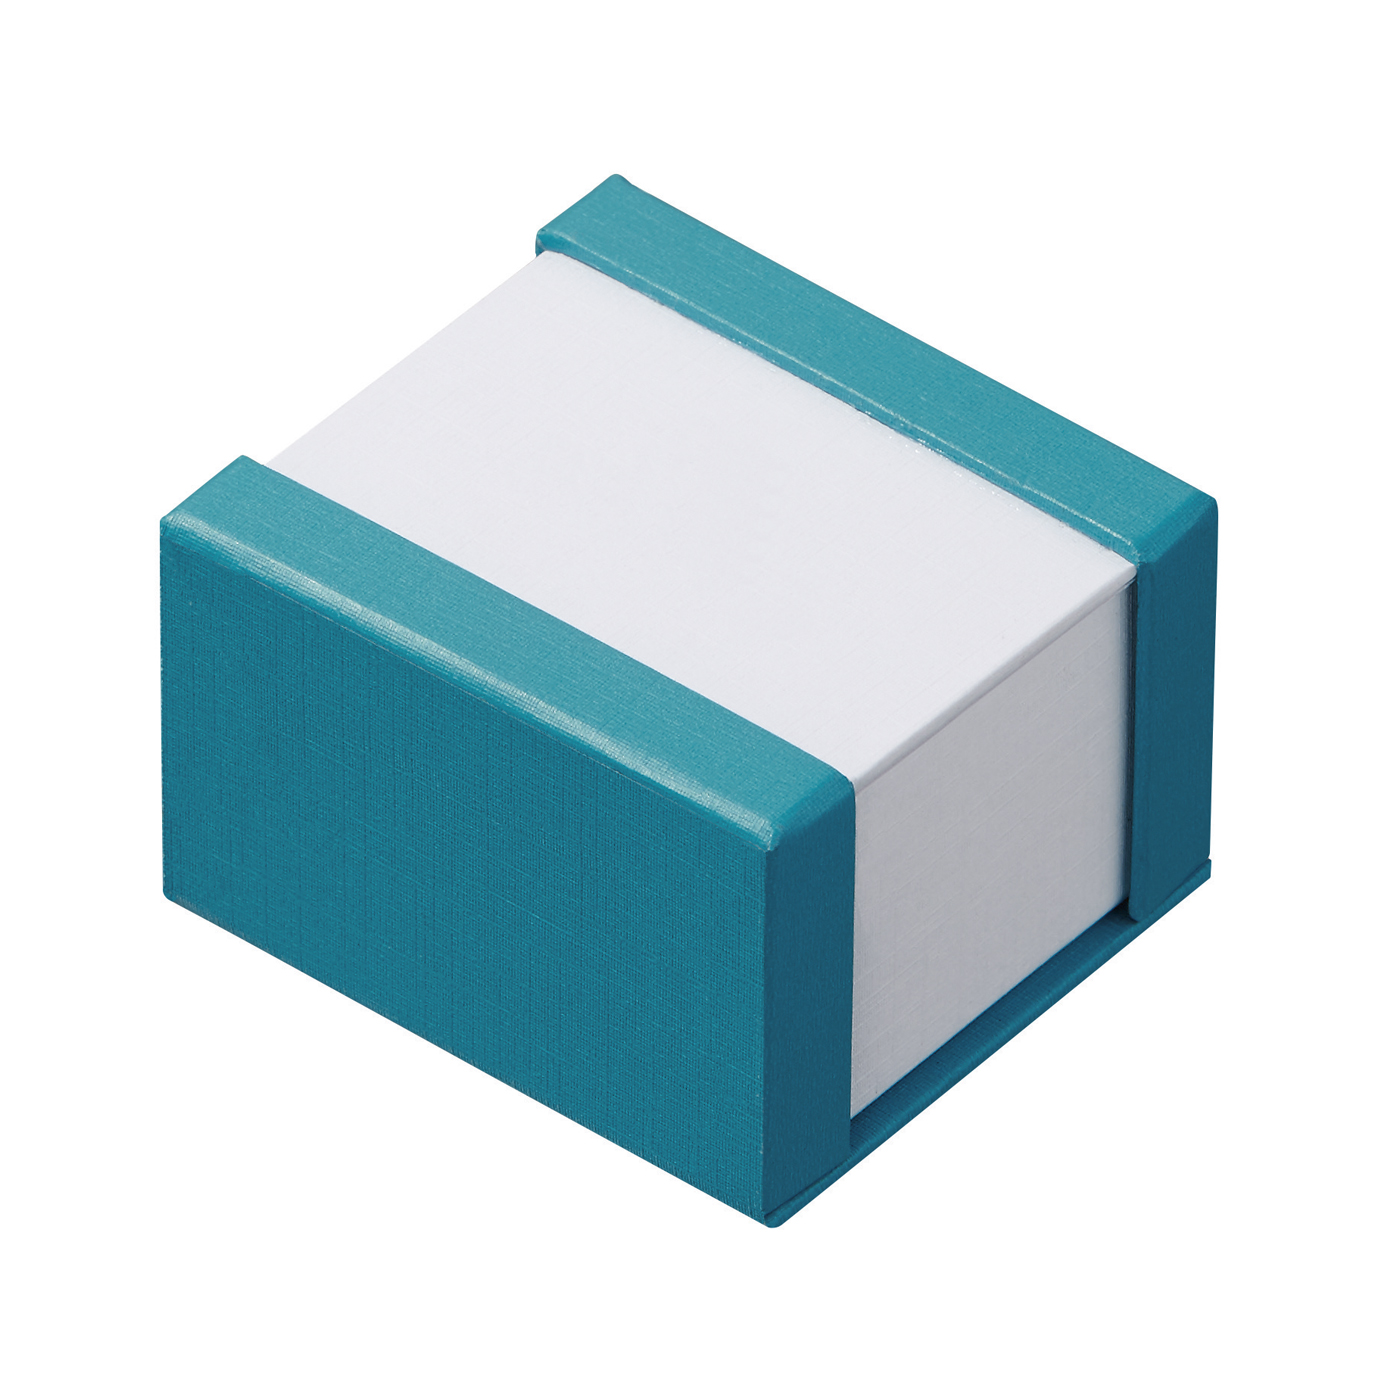 Jewellery Packaging "Claptonn",Turquoise-White,60 x 50 x32mm - 1 piece